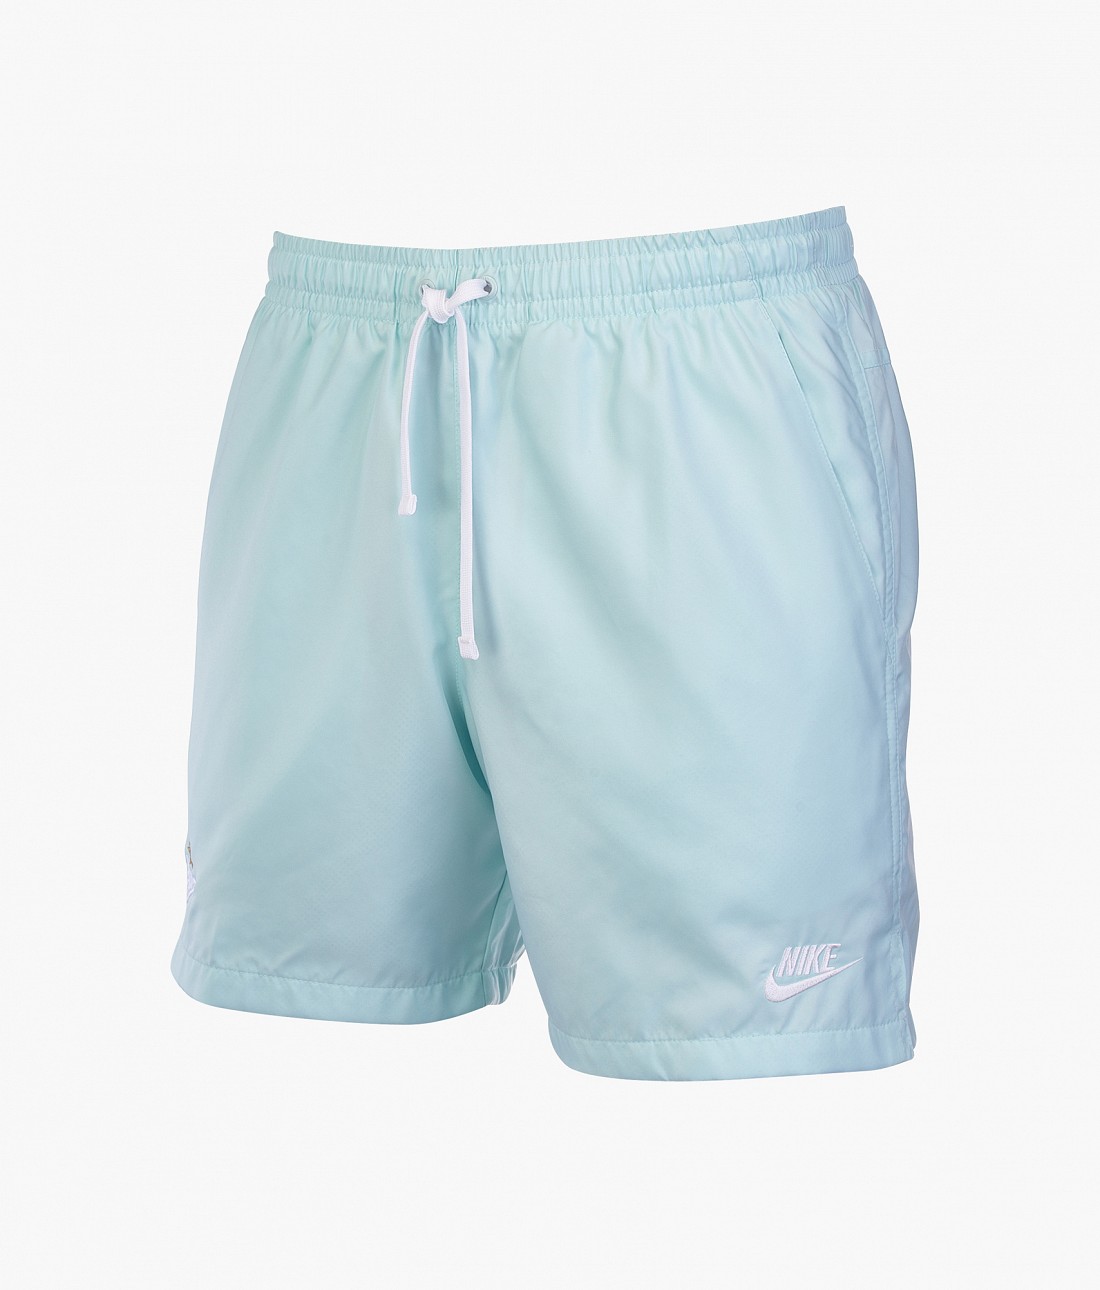 Shorts Nike - FC Zenit Official Store